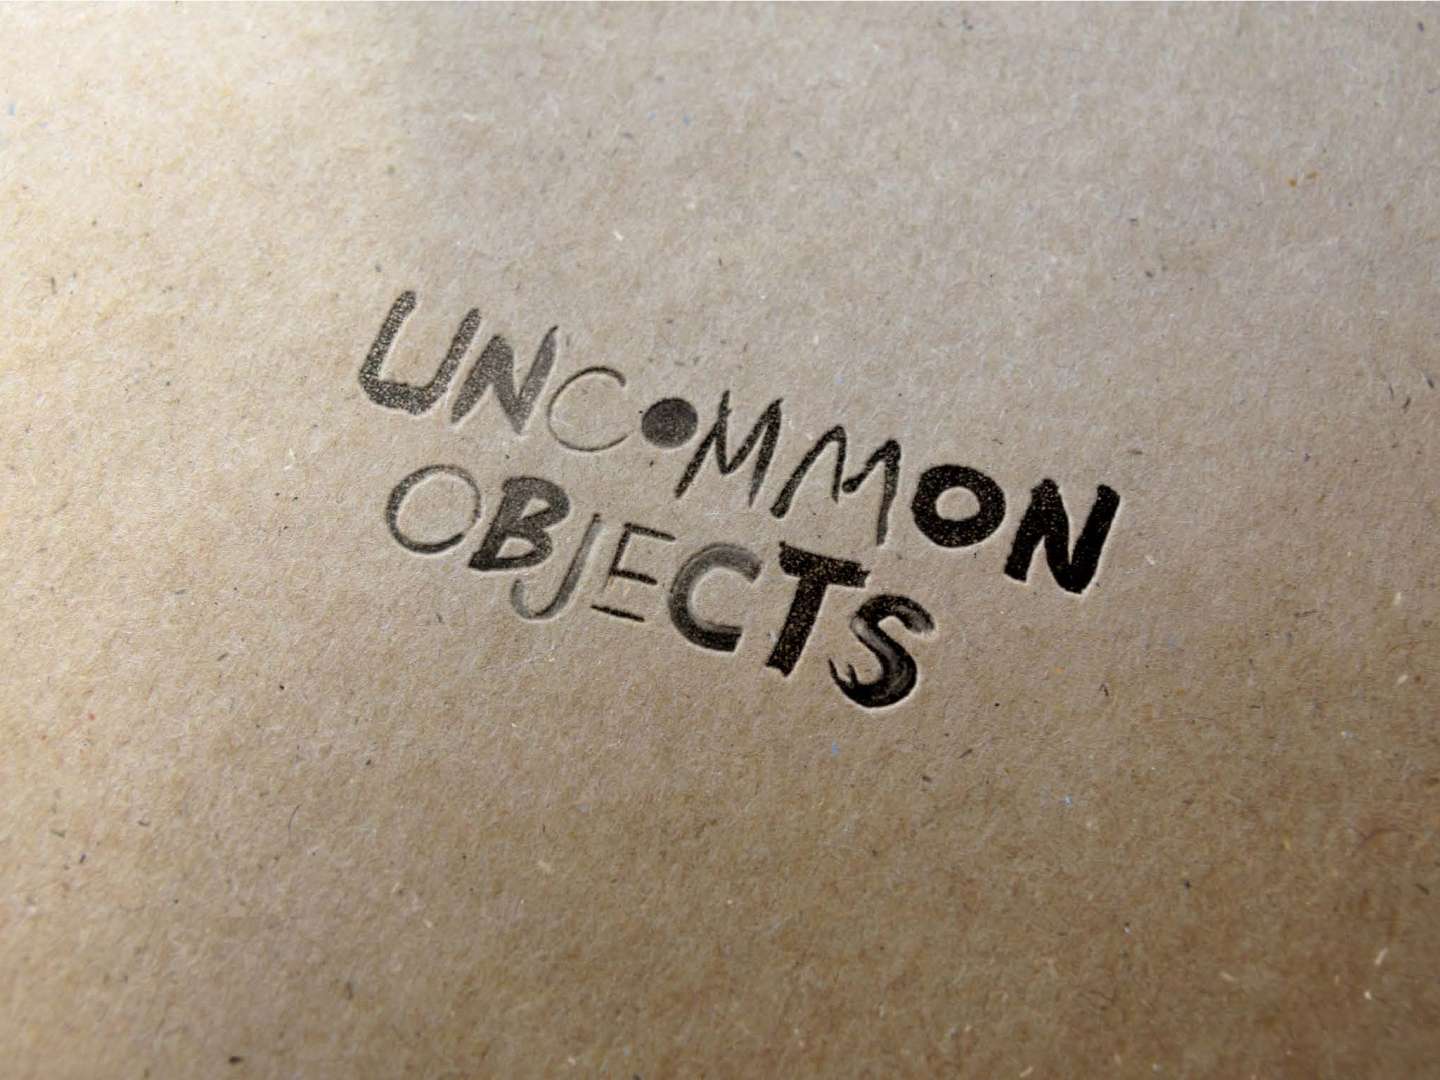 Uncommon Objects